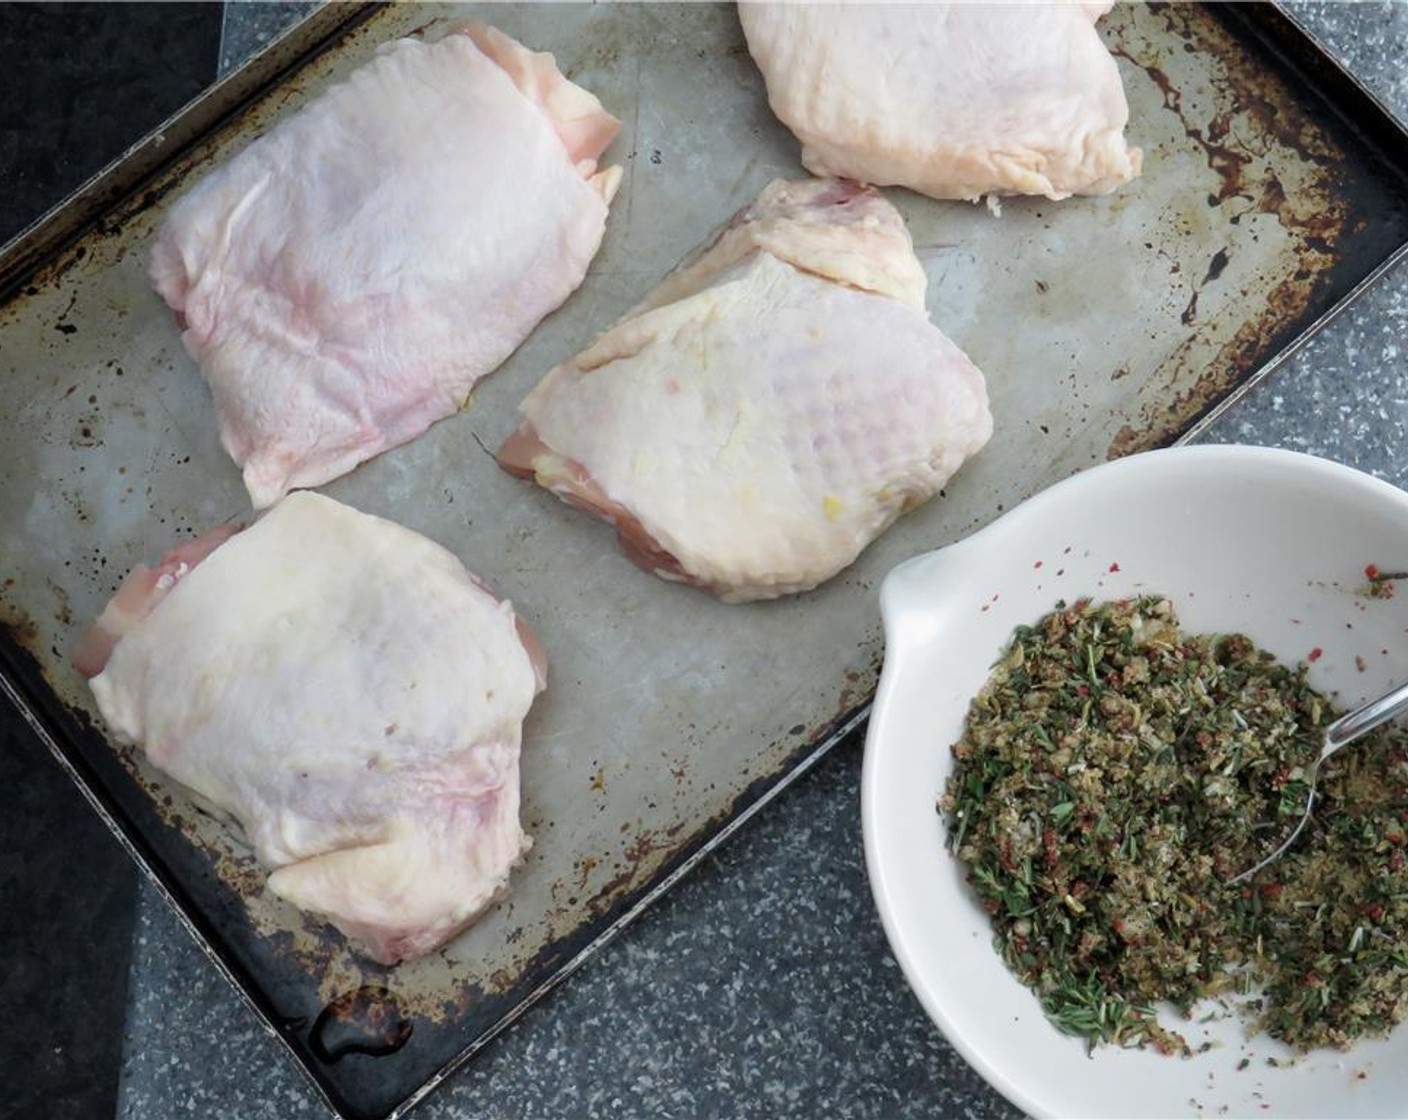 step 2 Using a sharp knife, trim any excess fat from the Bone-in, Skin-on Chicken Thigh (1 lb). Pat chicken dry with a paper towel. Liberally sprinkle the rub onto both sides of the chicken, and press with your fingers so that it adheres.